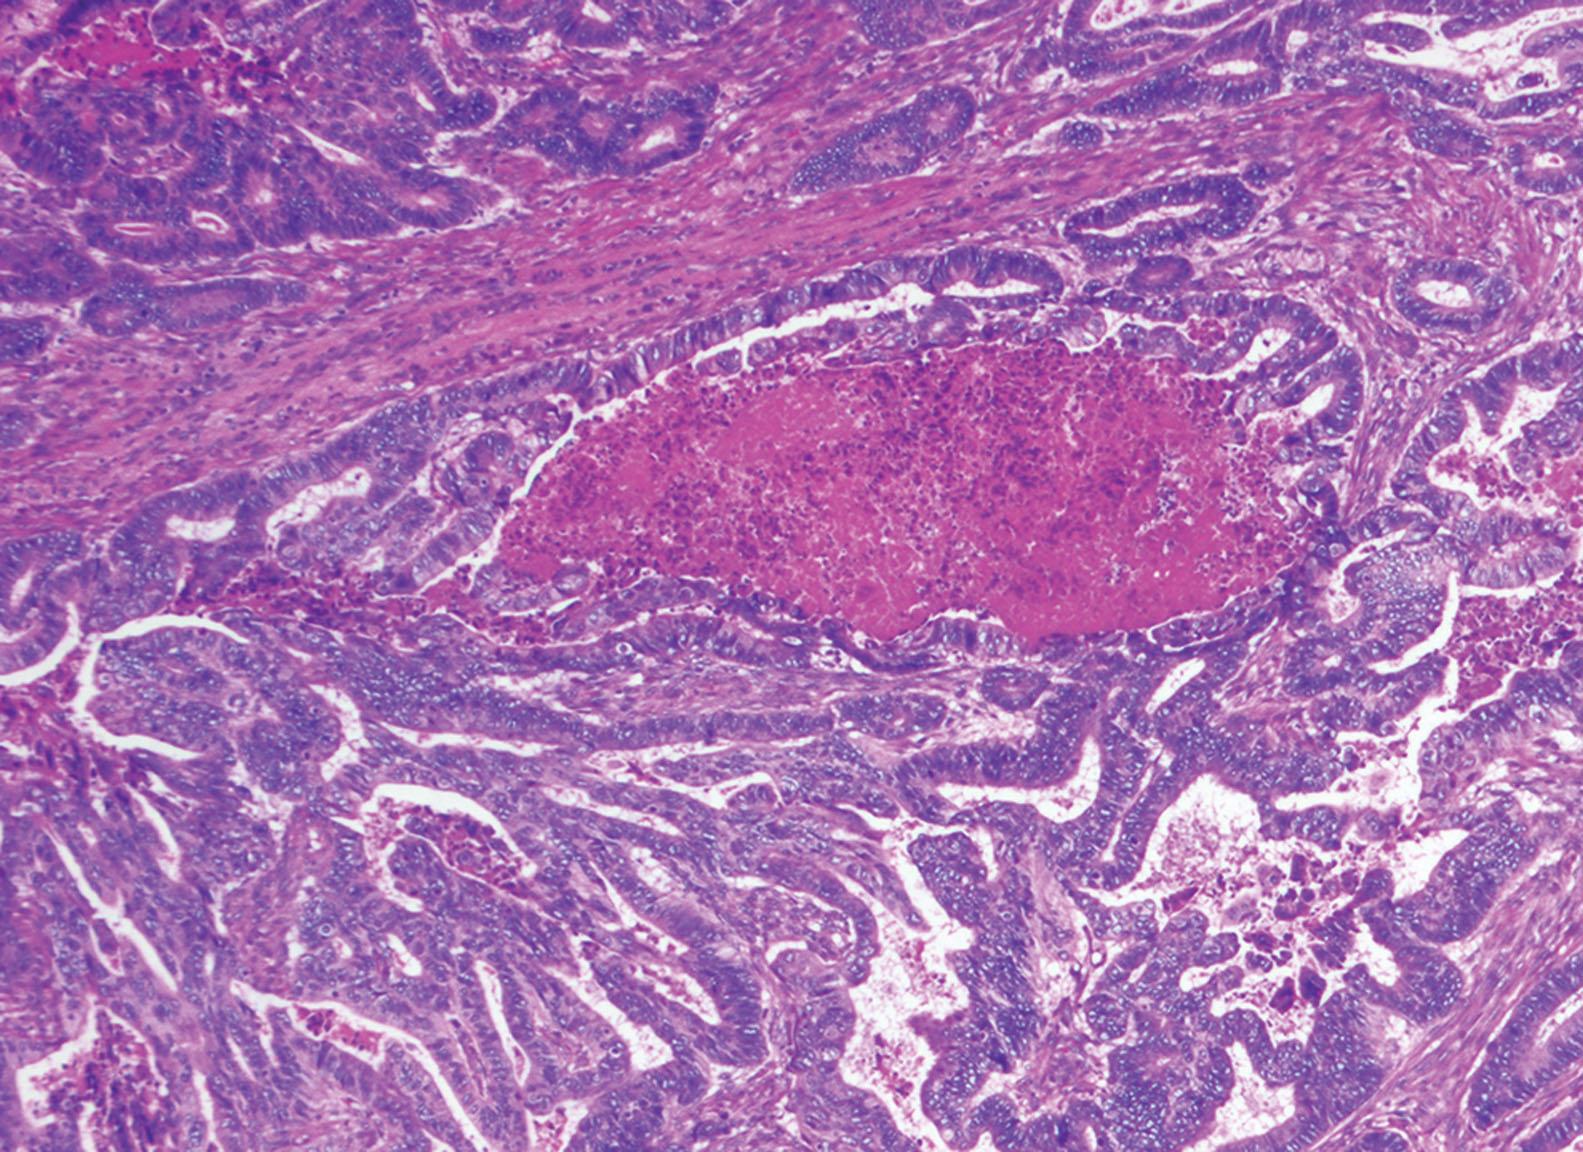 Figure 6.16, Ampullary adenocarcinoma, intestinal type, characterized by large glands lined by columnar cells with pseudostratified nuclei and associated with luminal necrosis.